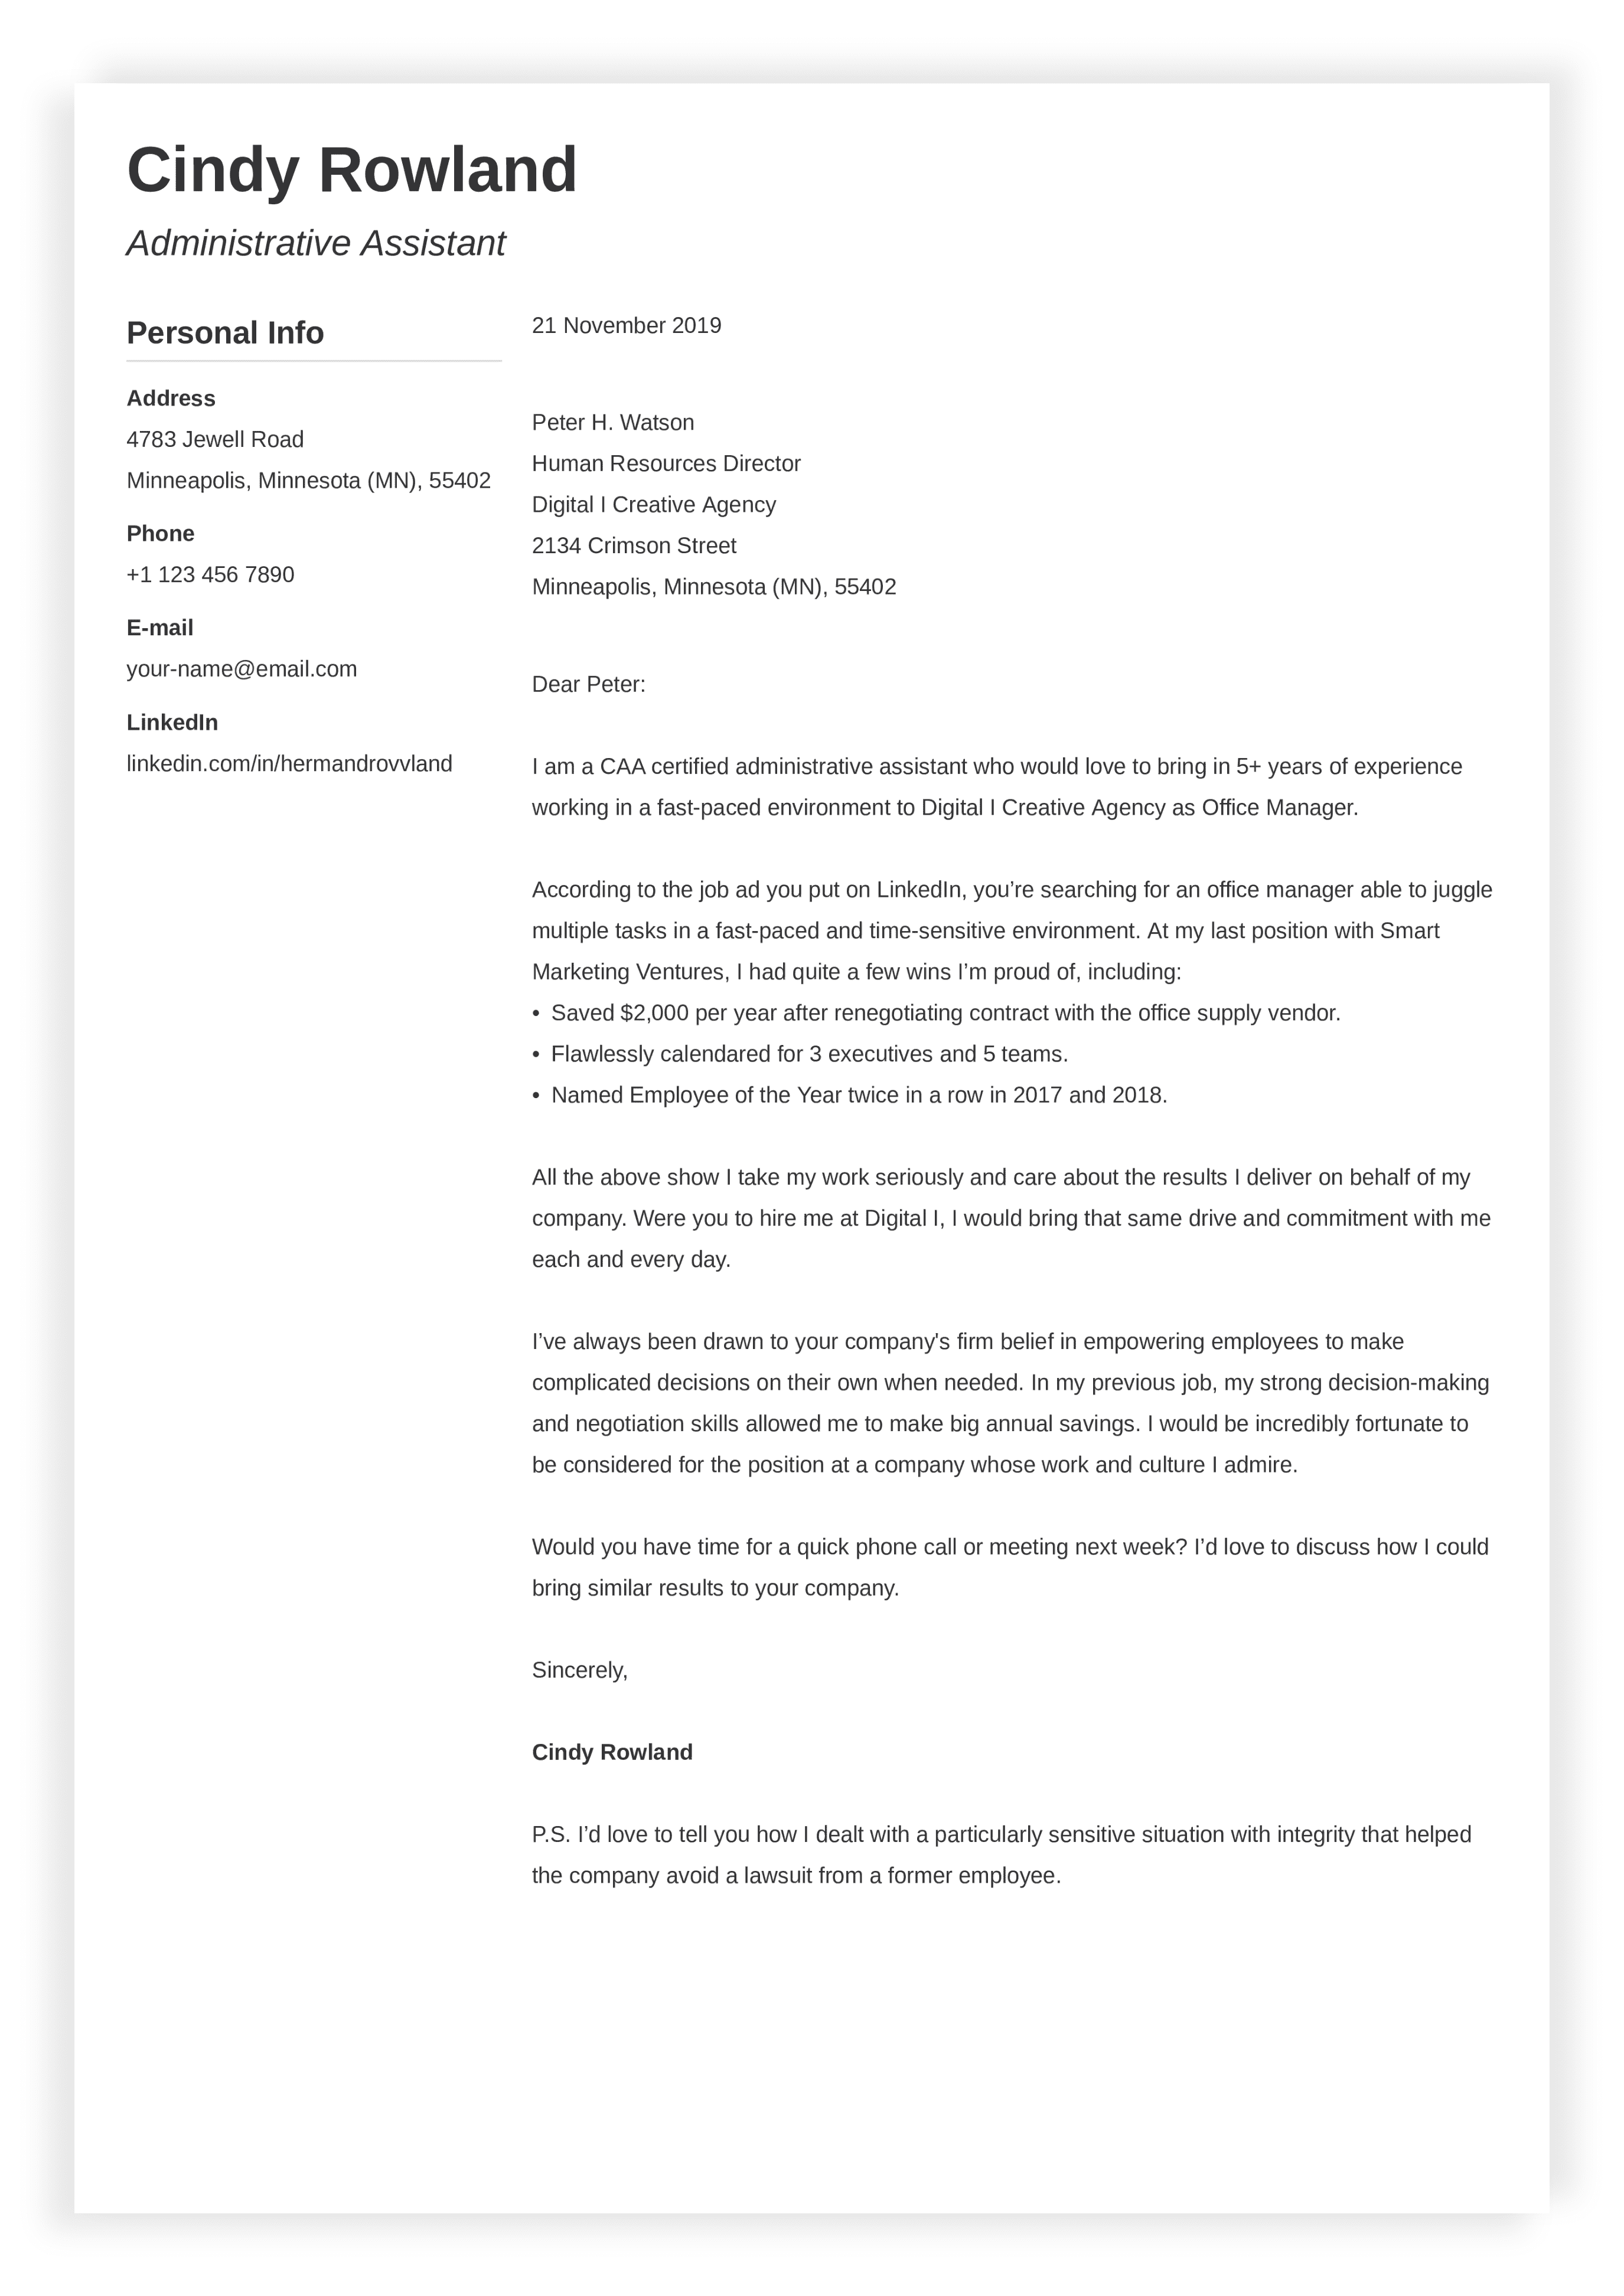 Do letters of recommendation need to be on resume paper